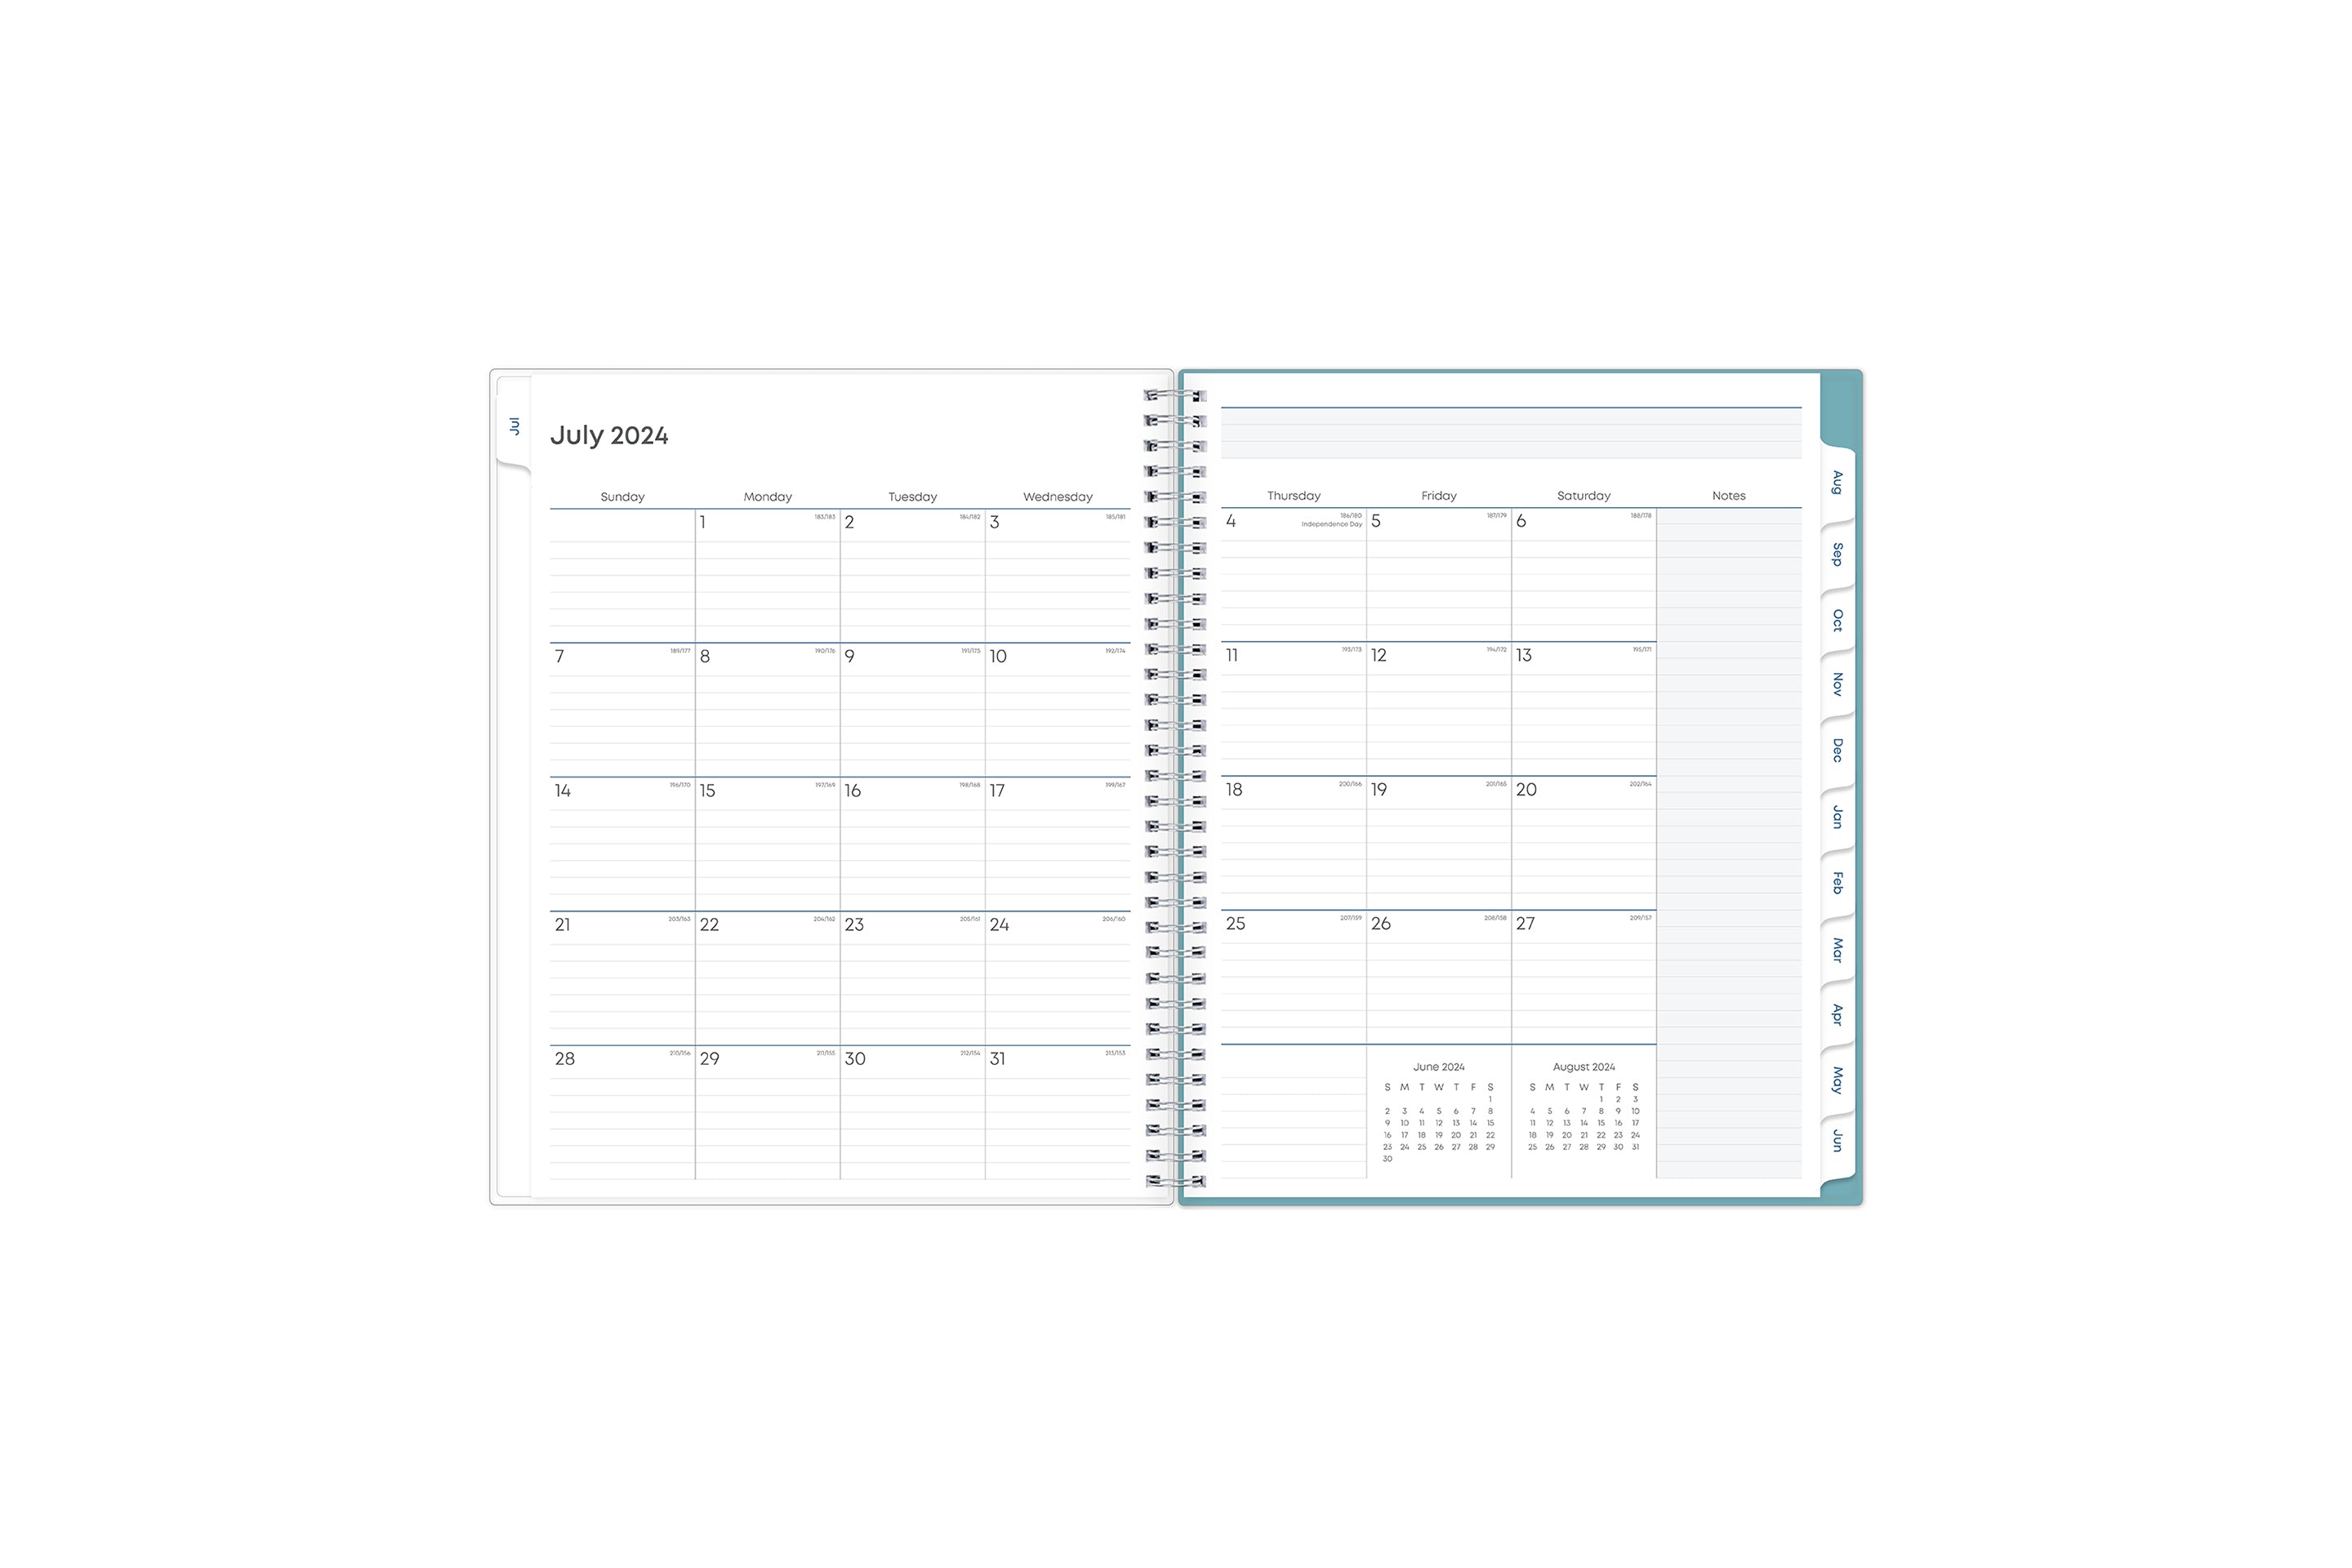 teacher lesson planner monthly view featuring ample lined writing space for projects, field trips, goals, deadlines, notes section, reference calendars and mint green monthly tabs in 8.5x11 size july 2024 - june 2025